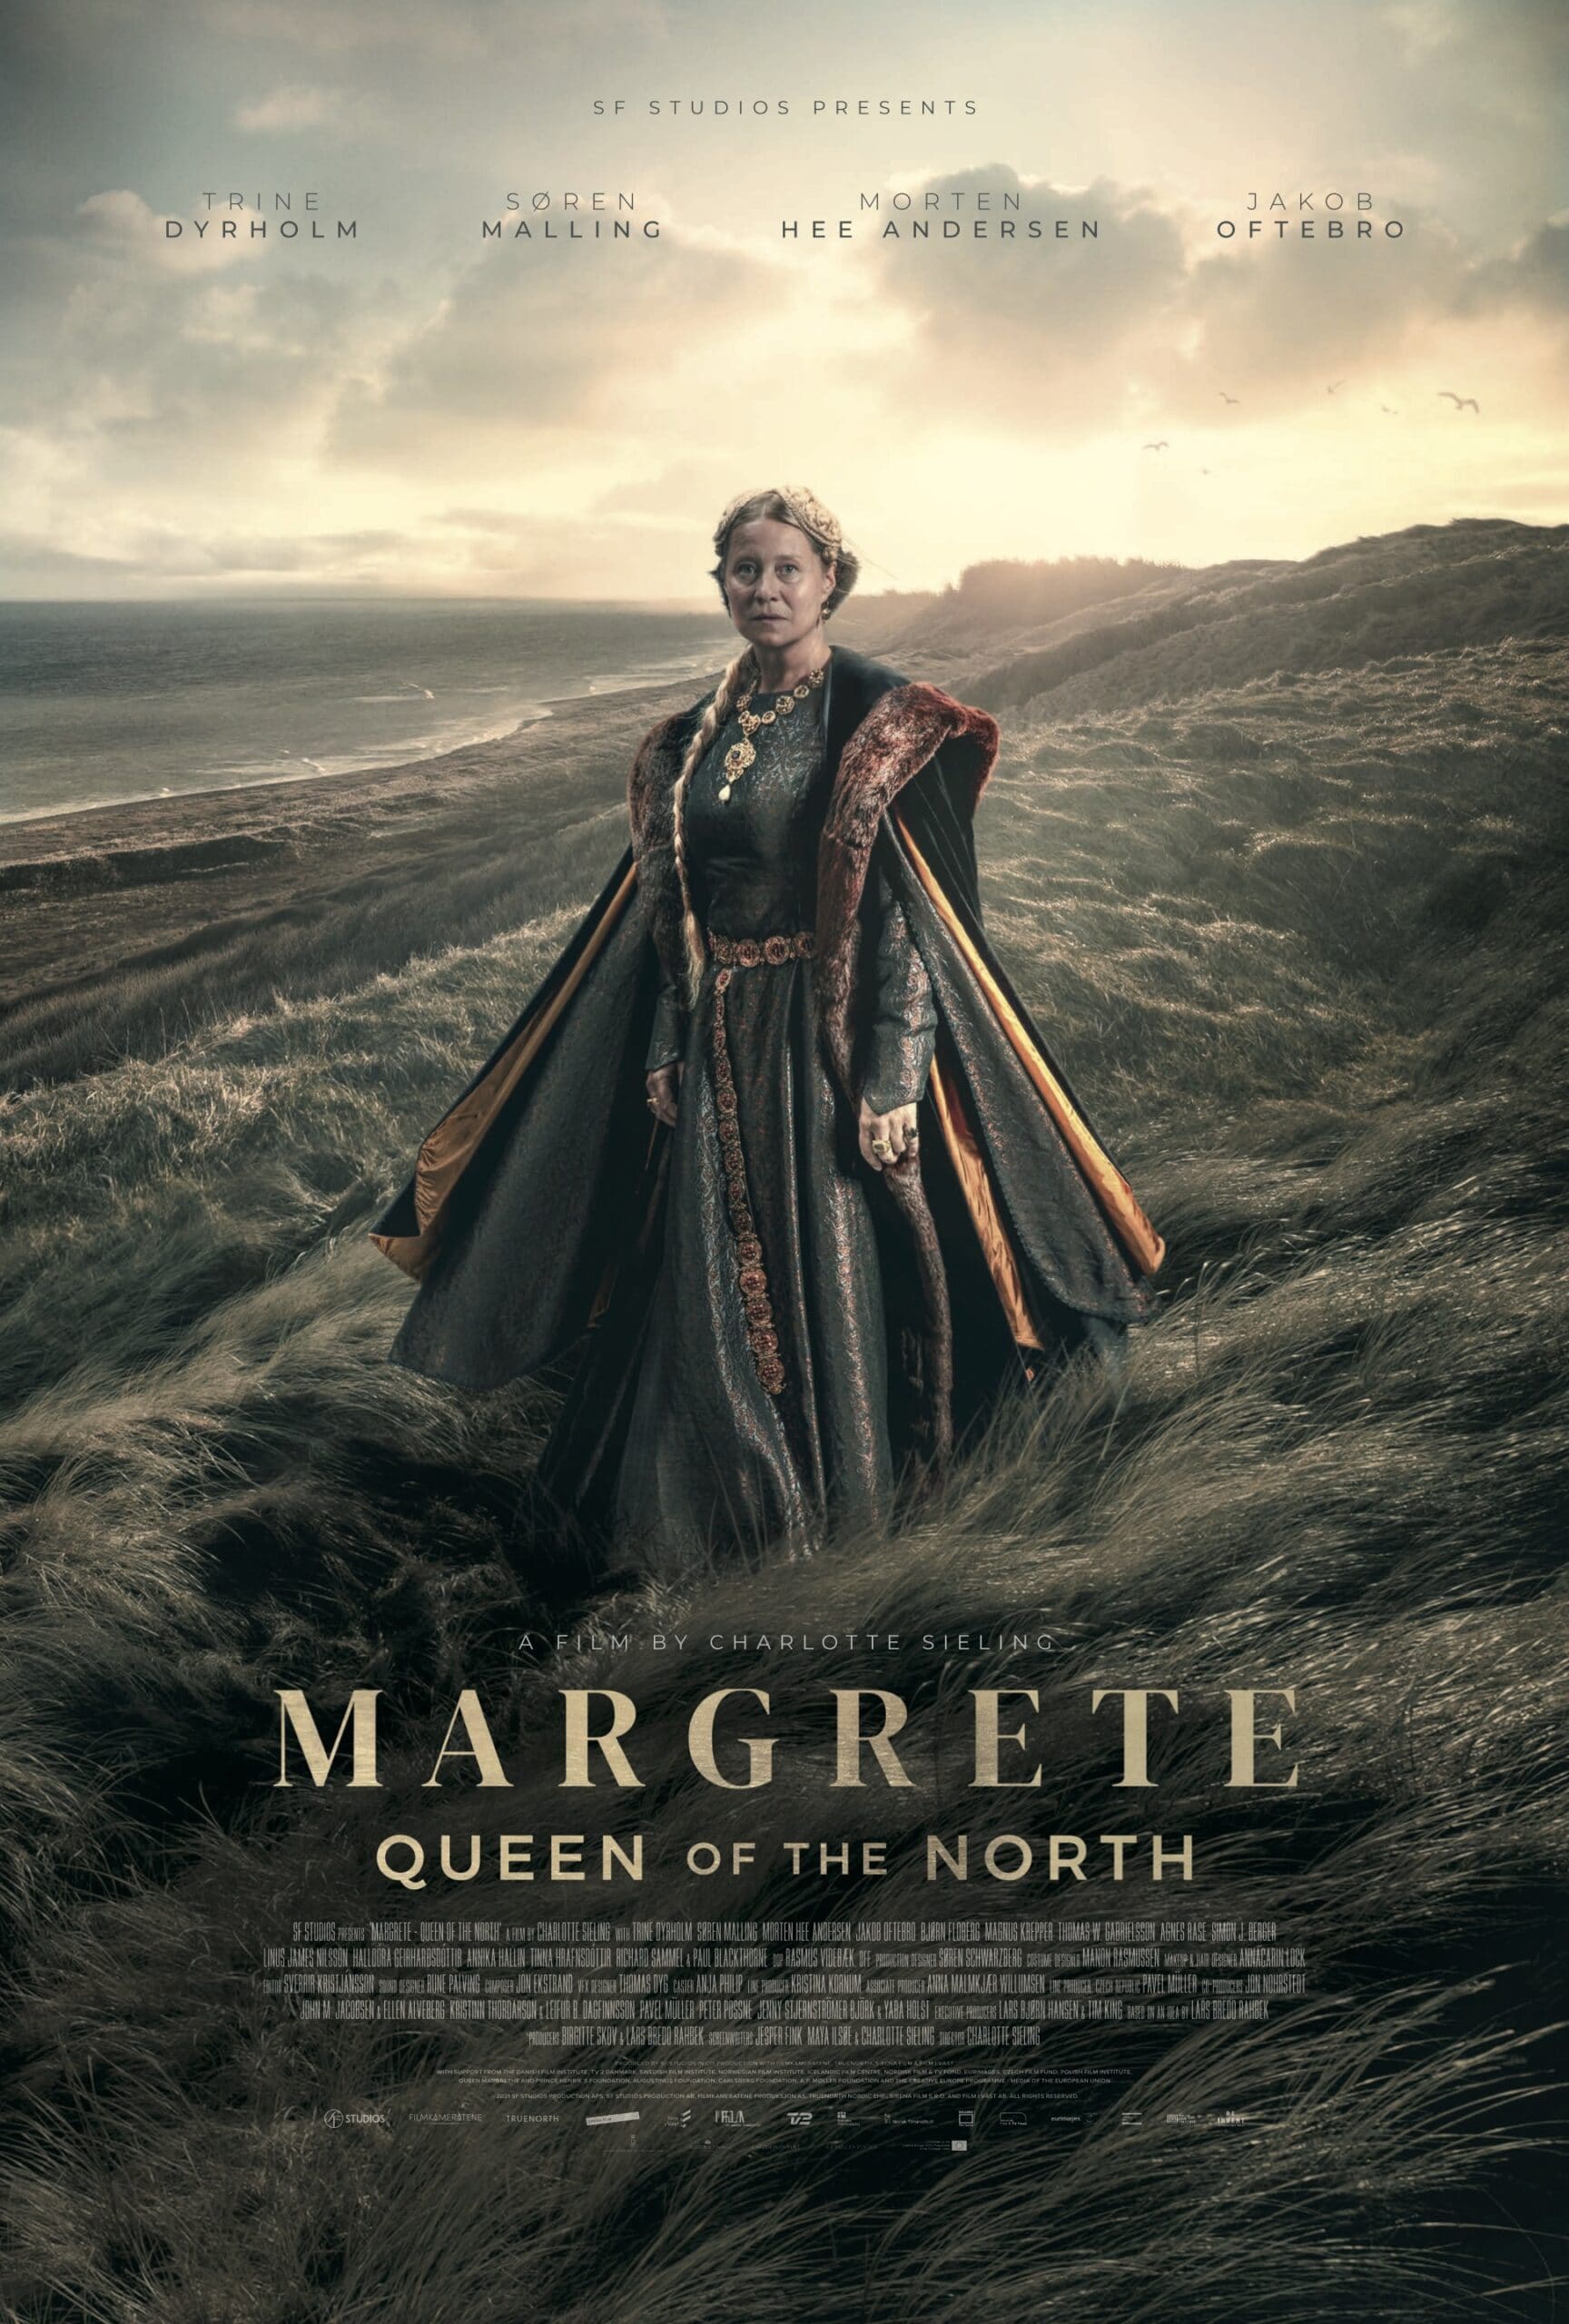 Press release: Trailer and poster released for MARGRETE – QUEEN OF THE NORTH starring Trine Dyrholm